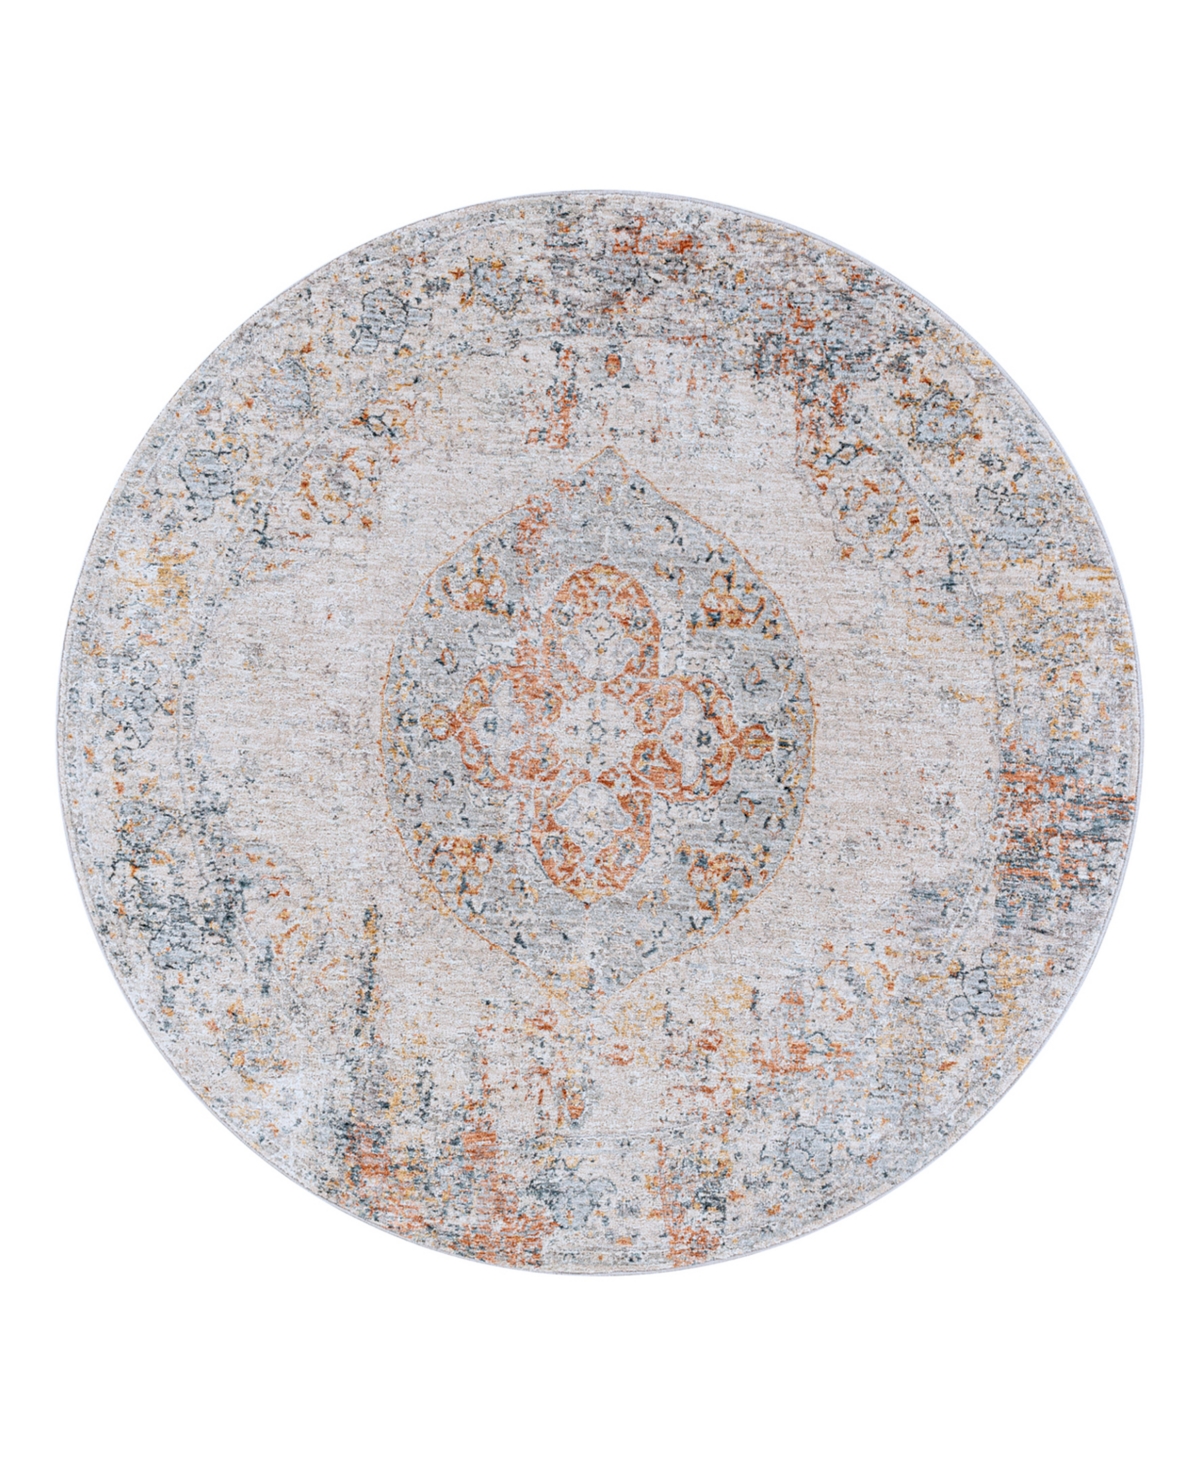 Surya Laila Laa-2306 5'3x5'3 Round Area Rug In Red